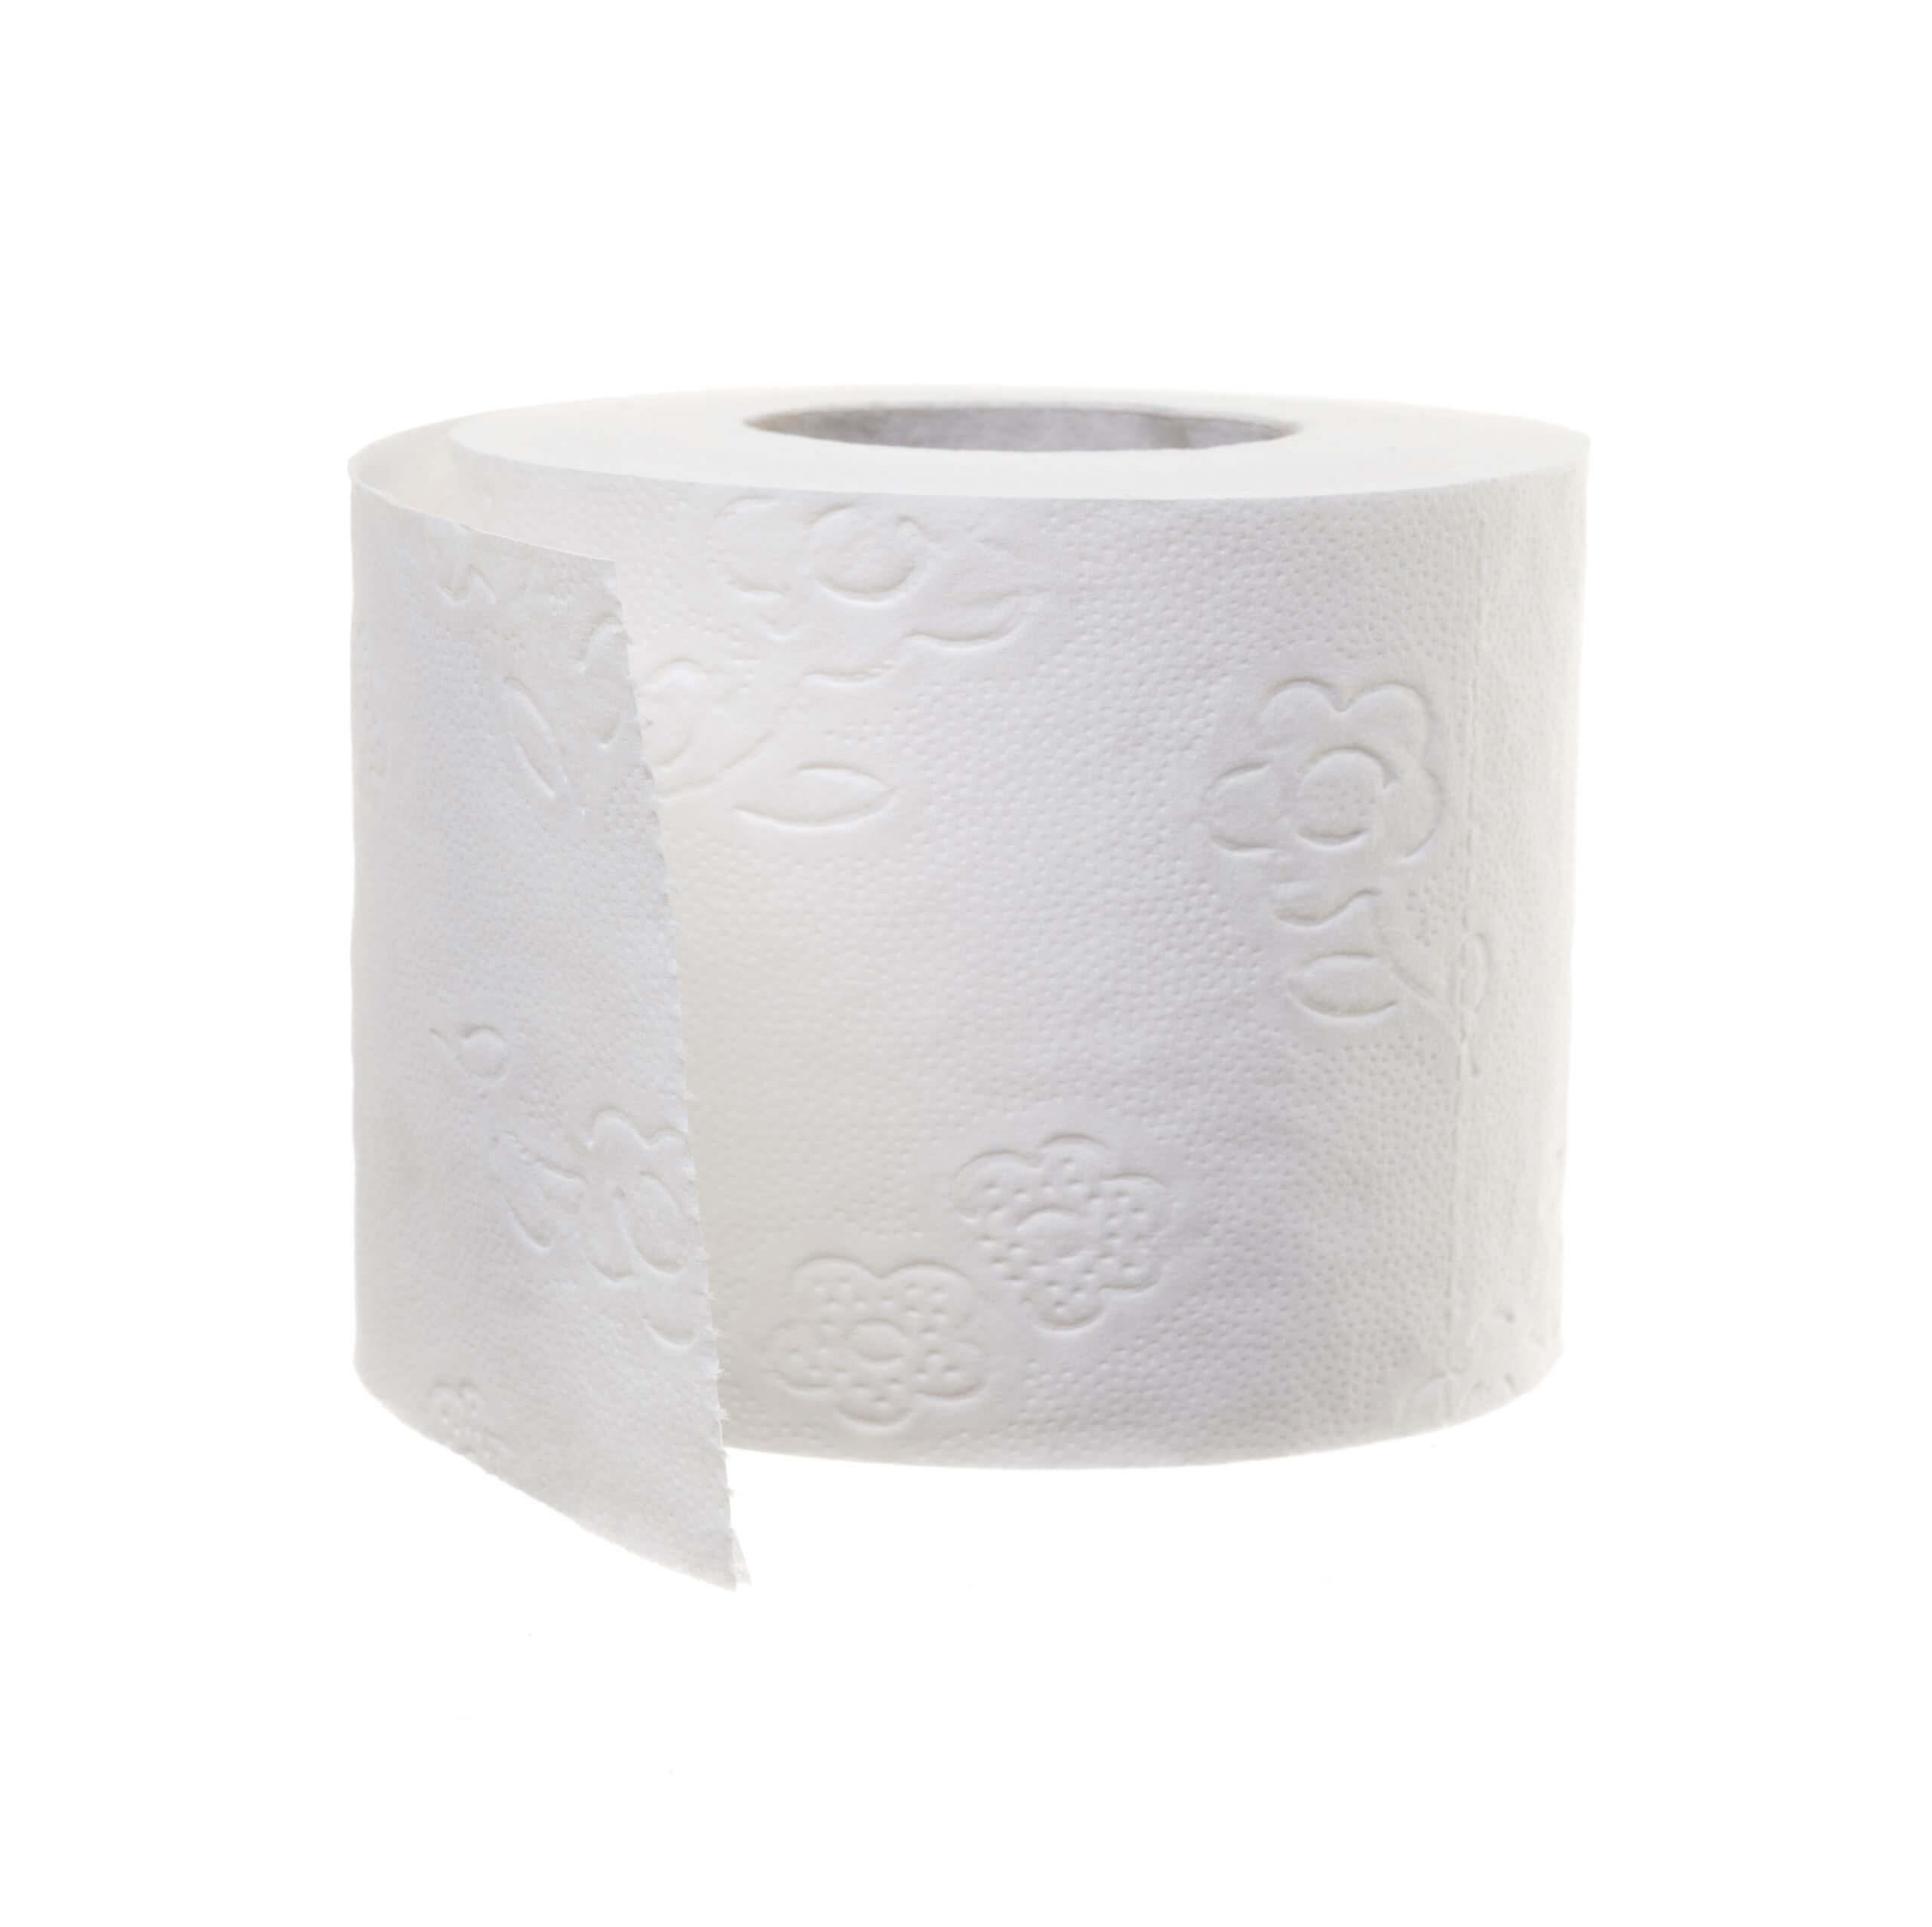 An image showing a single roll of our Office Toilet Rolls.